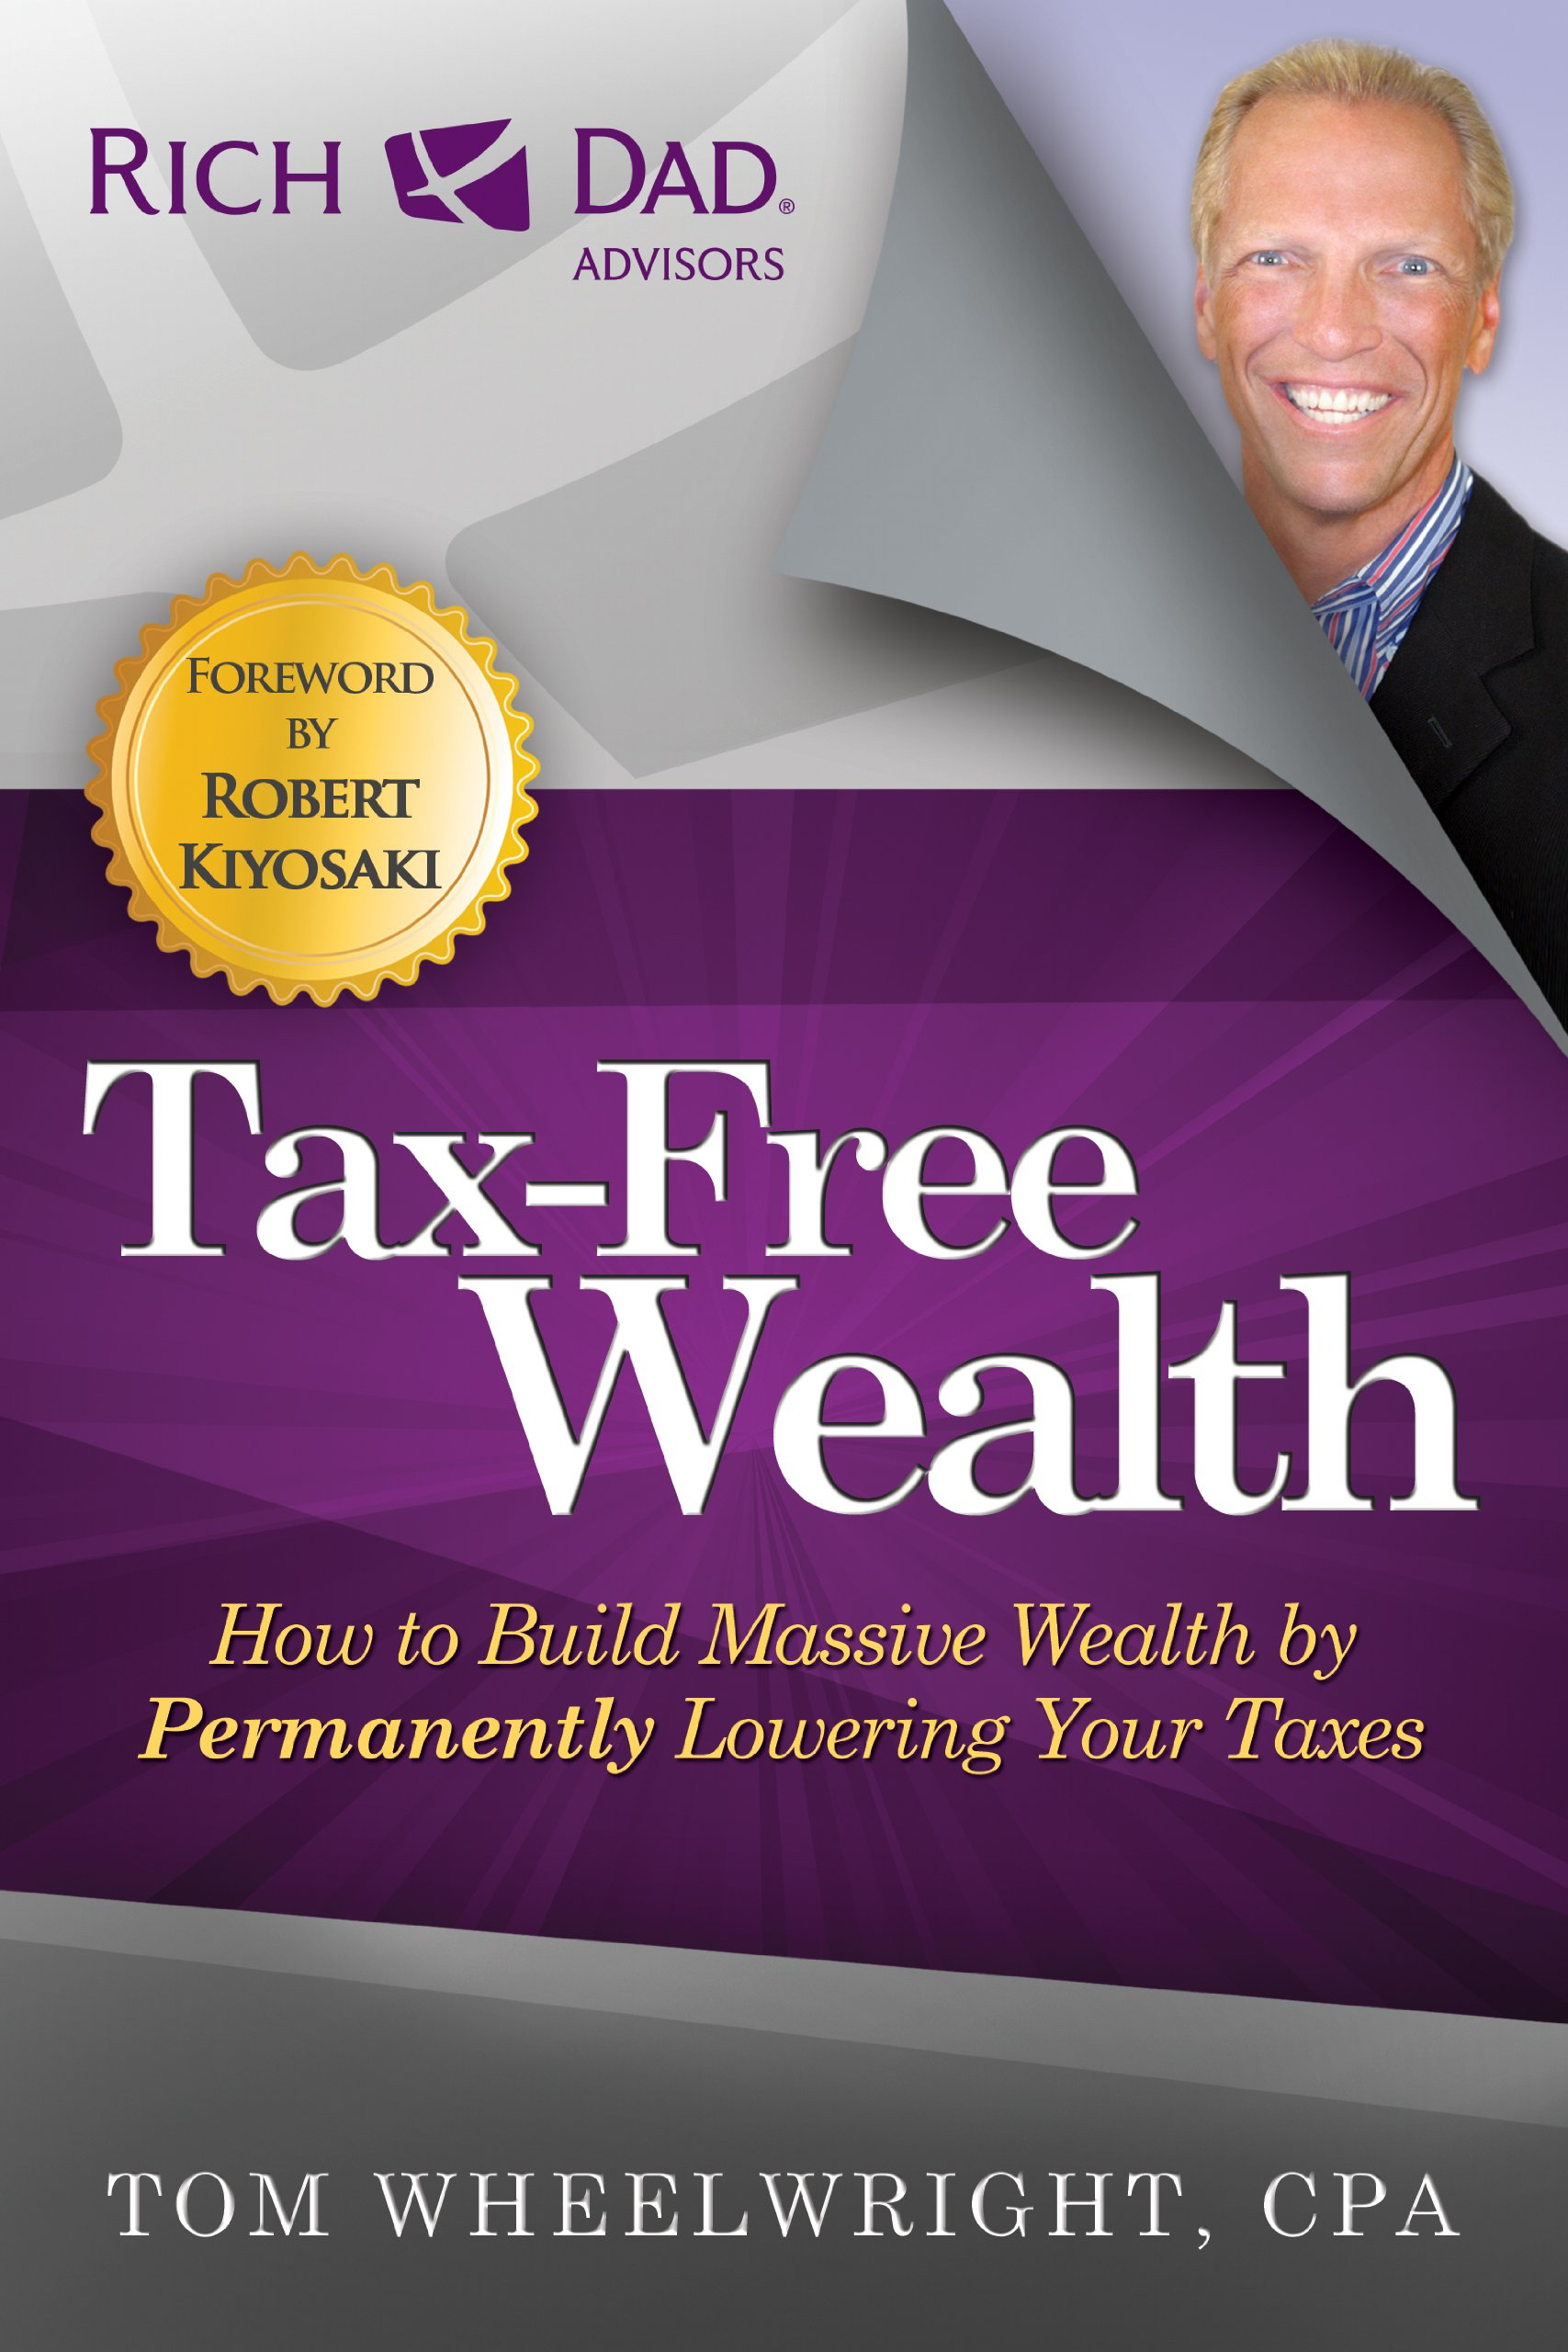 Tax-Free Wealth by CPA and CEO Tom Wheelwright